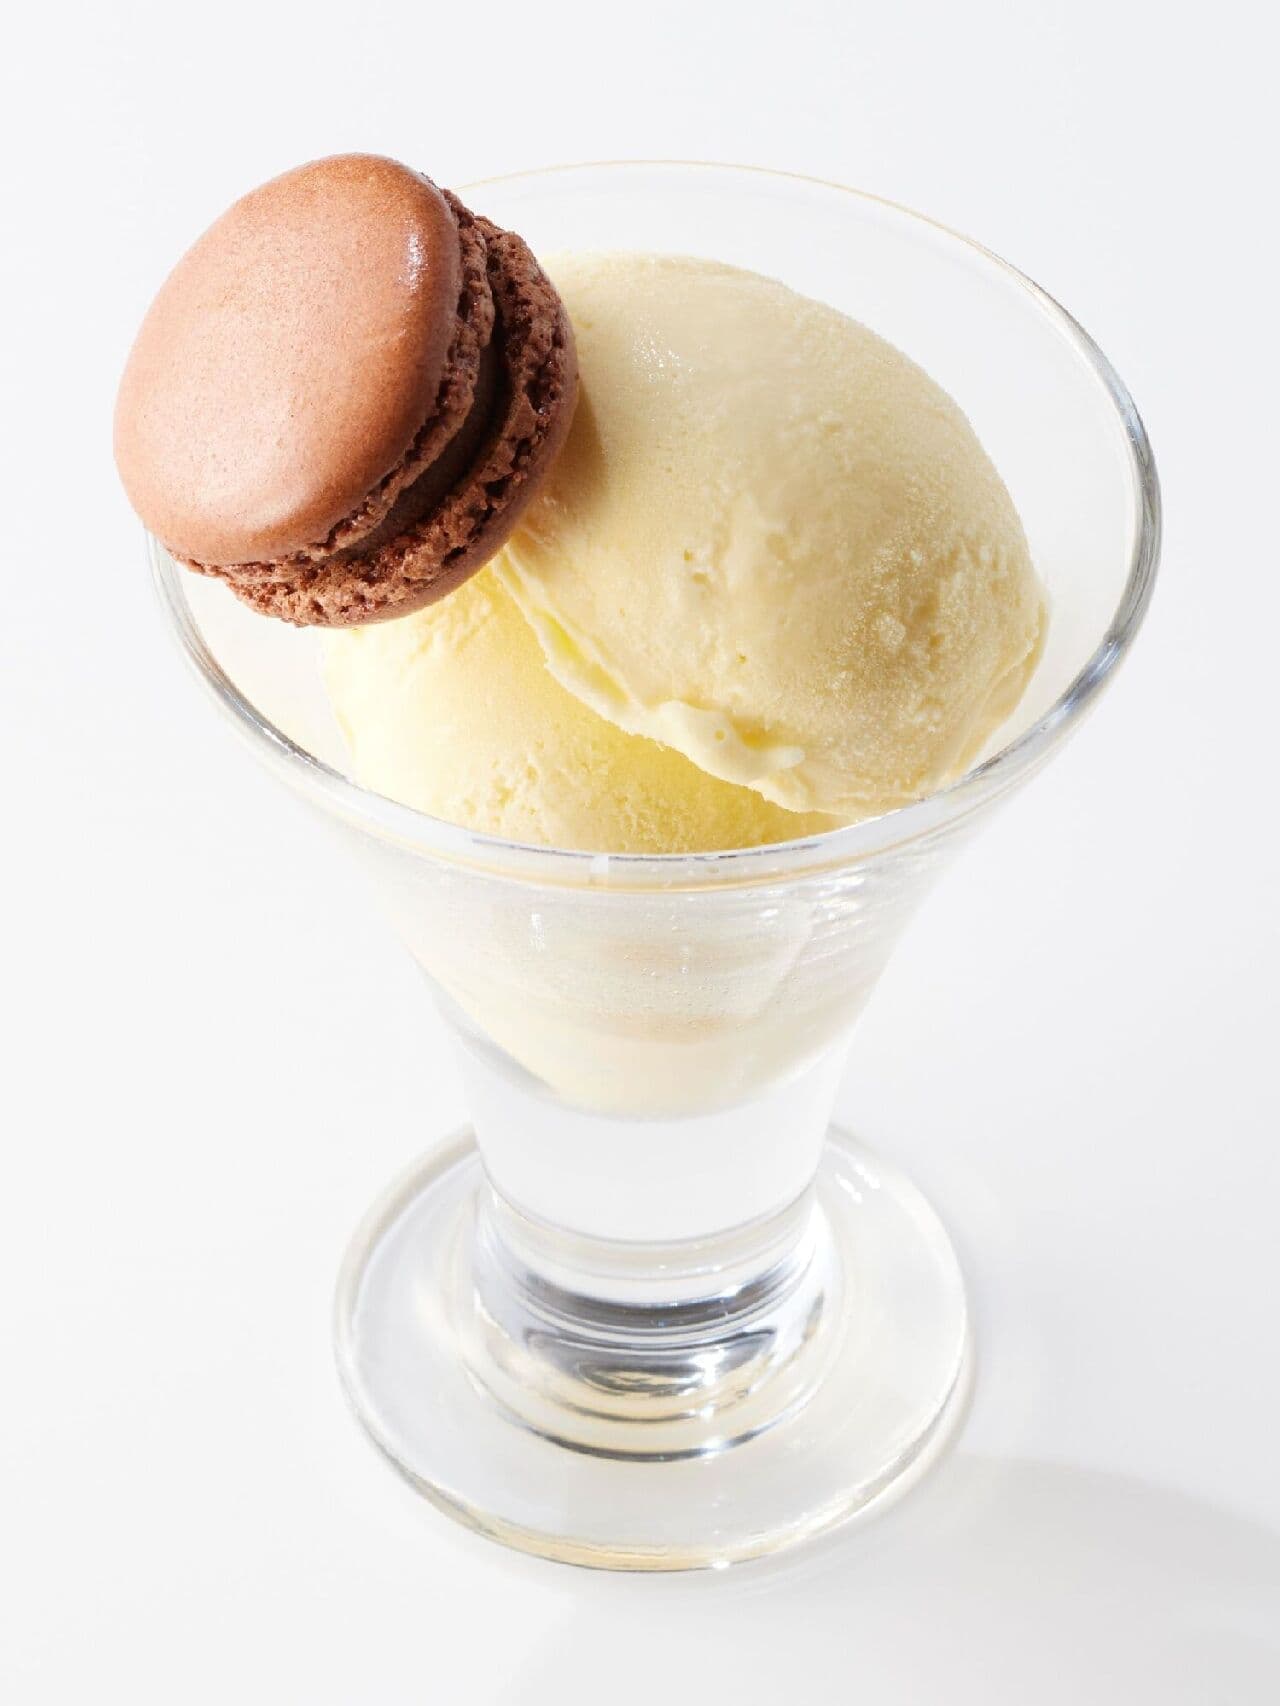 Three types of glass desserts combining ice cream and macaroons